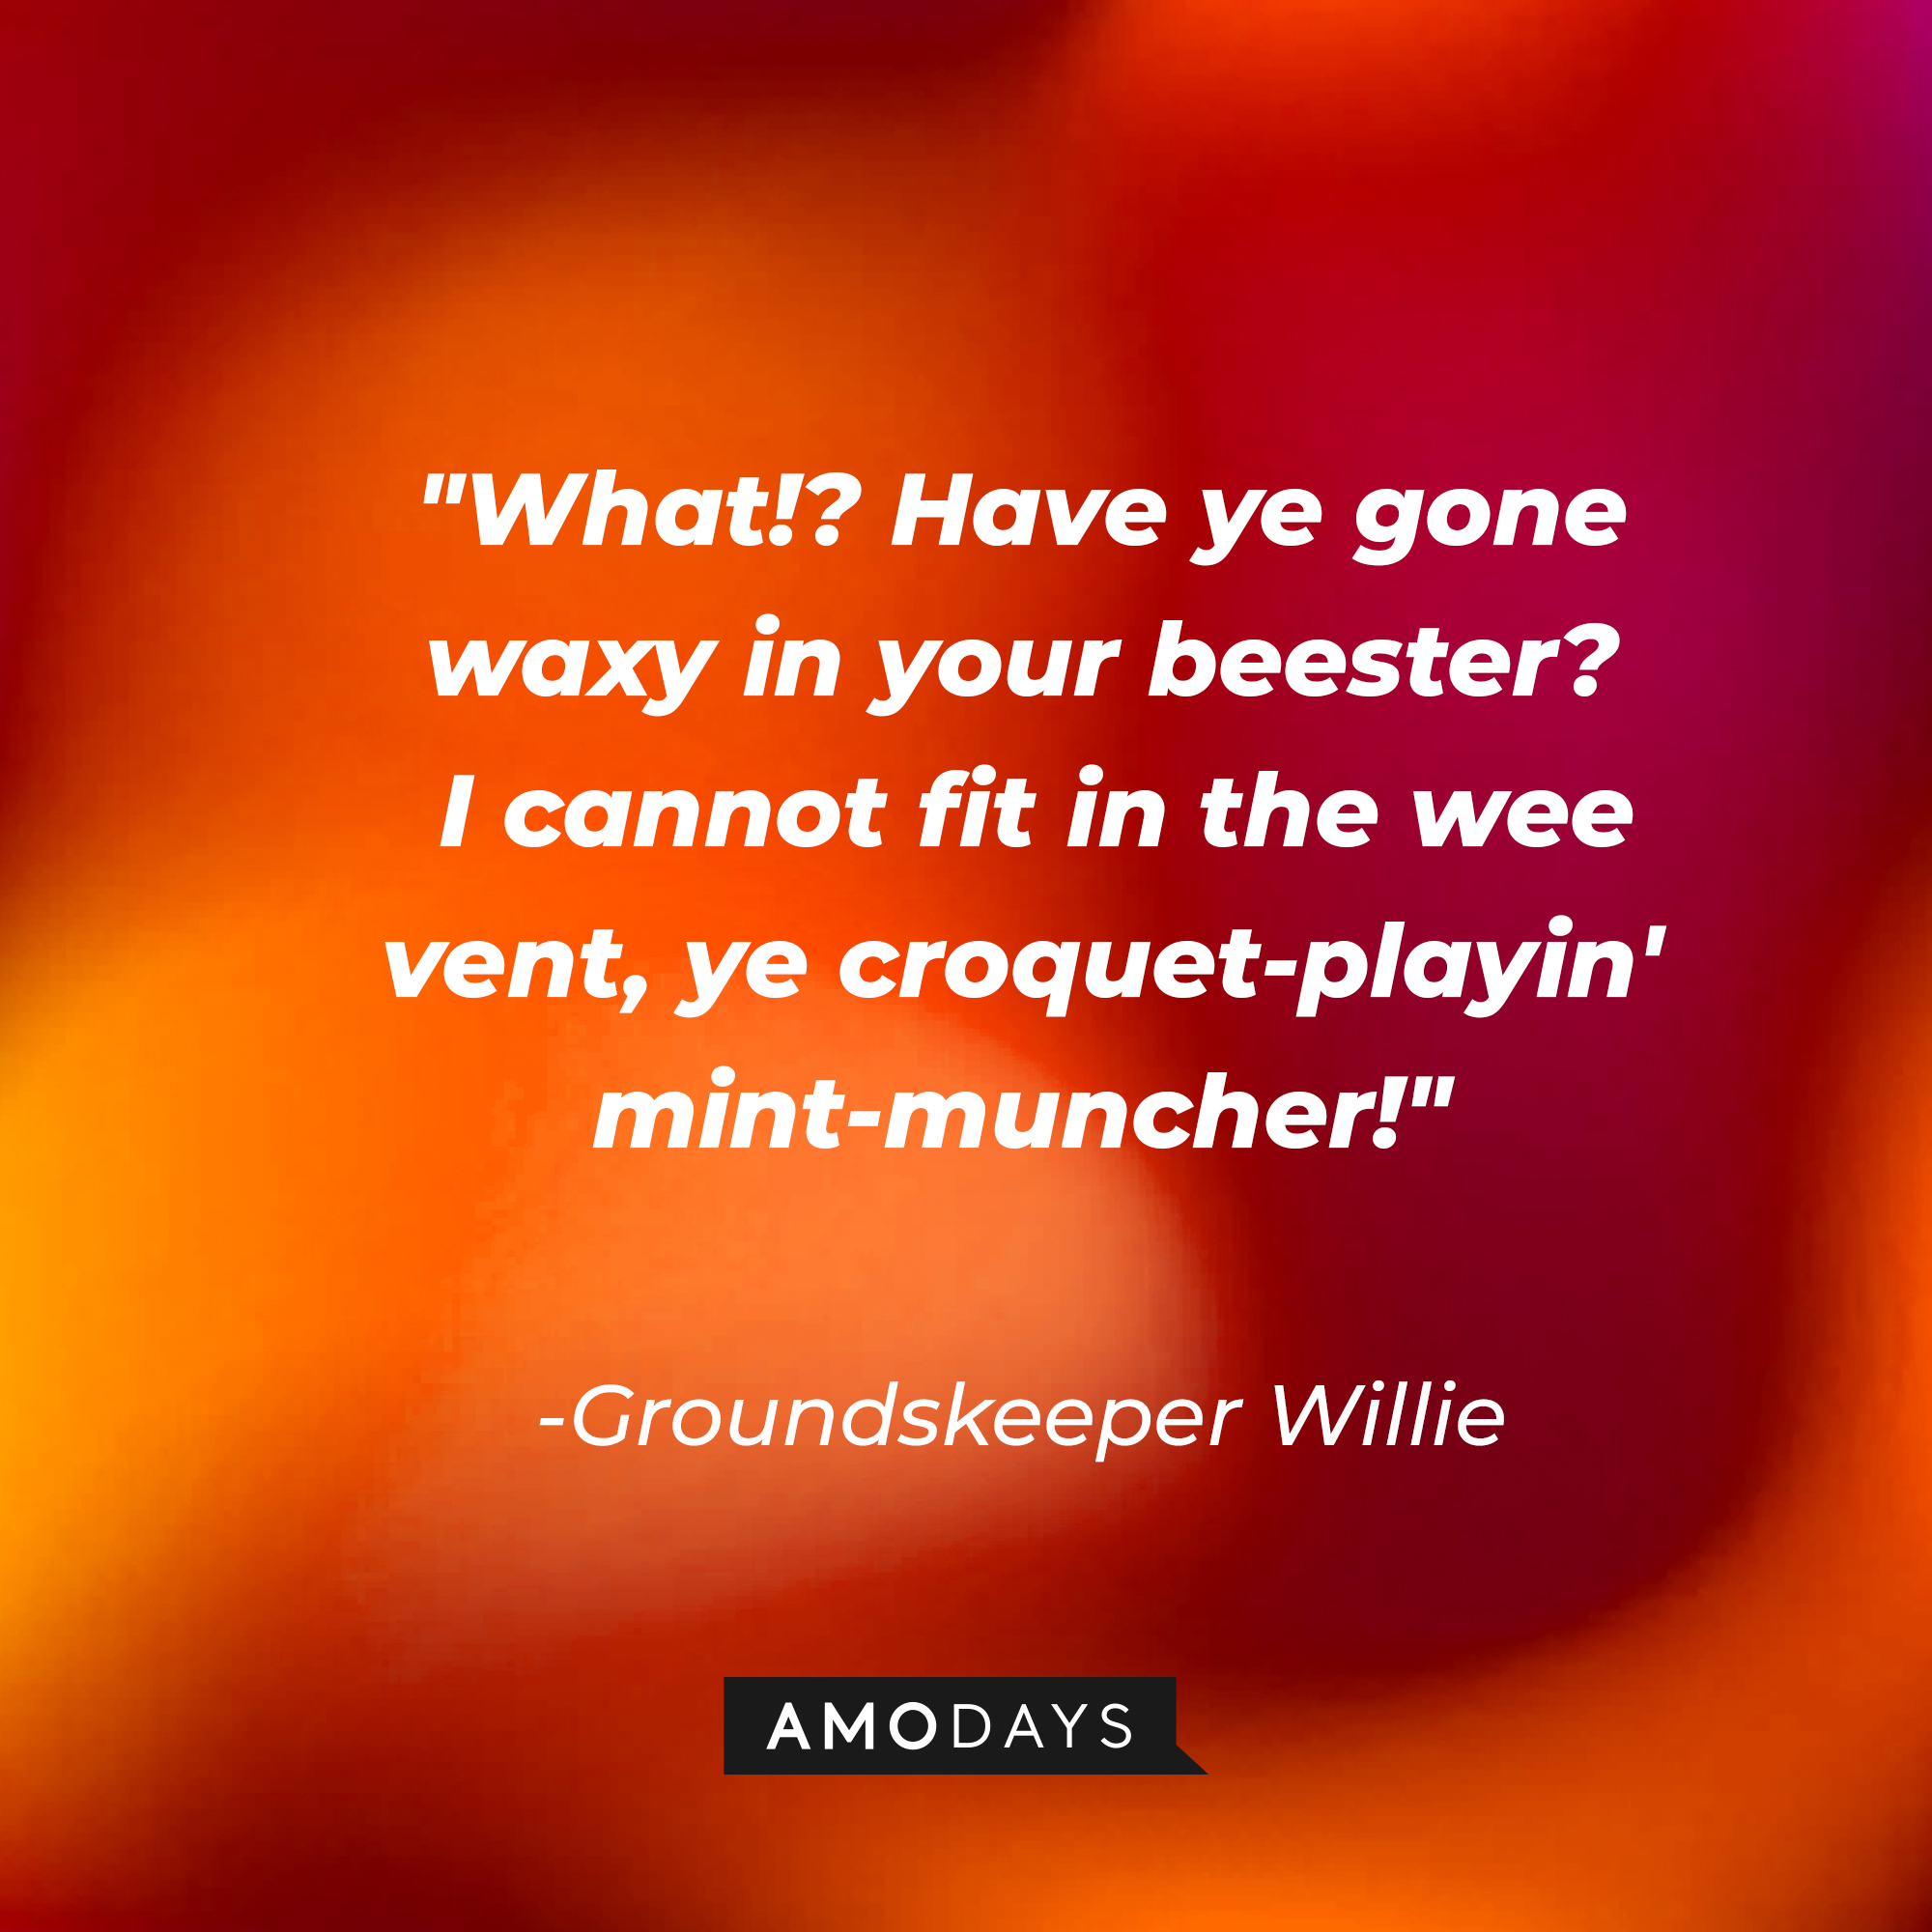 Groundskeeper Willie's quote: "What!? Have ye gone waxy in your beester? I cannot fit in the wee vent, ye croquet-playin' mint-muncher!" | Source: AmoDays